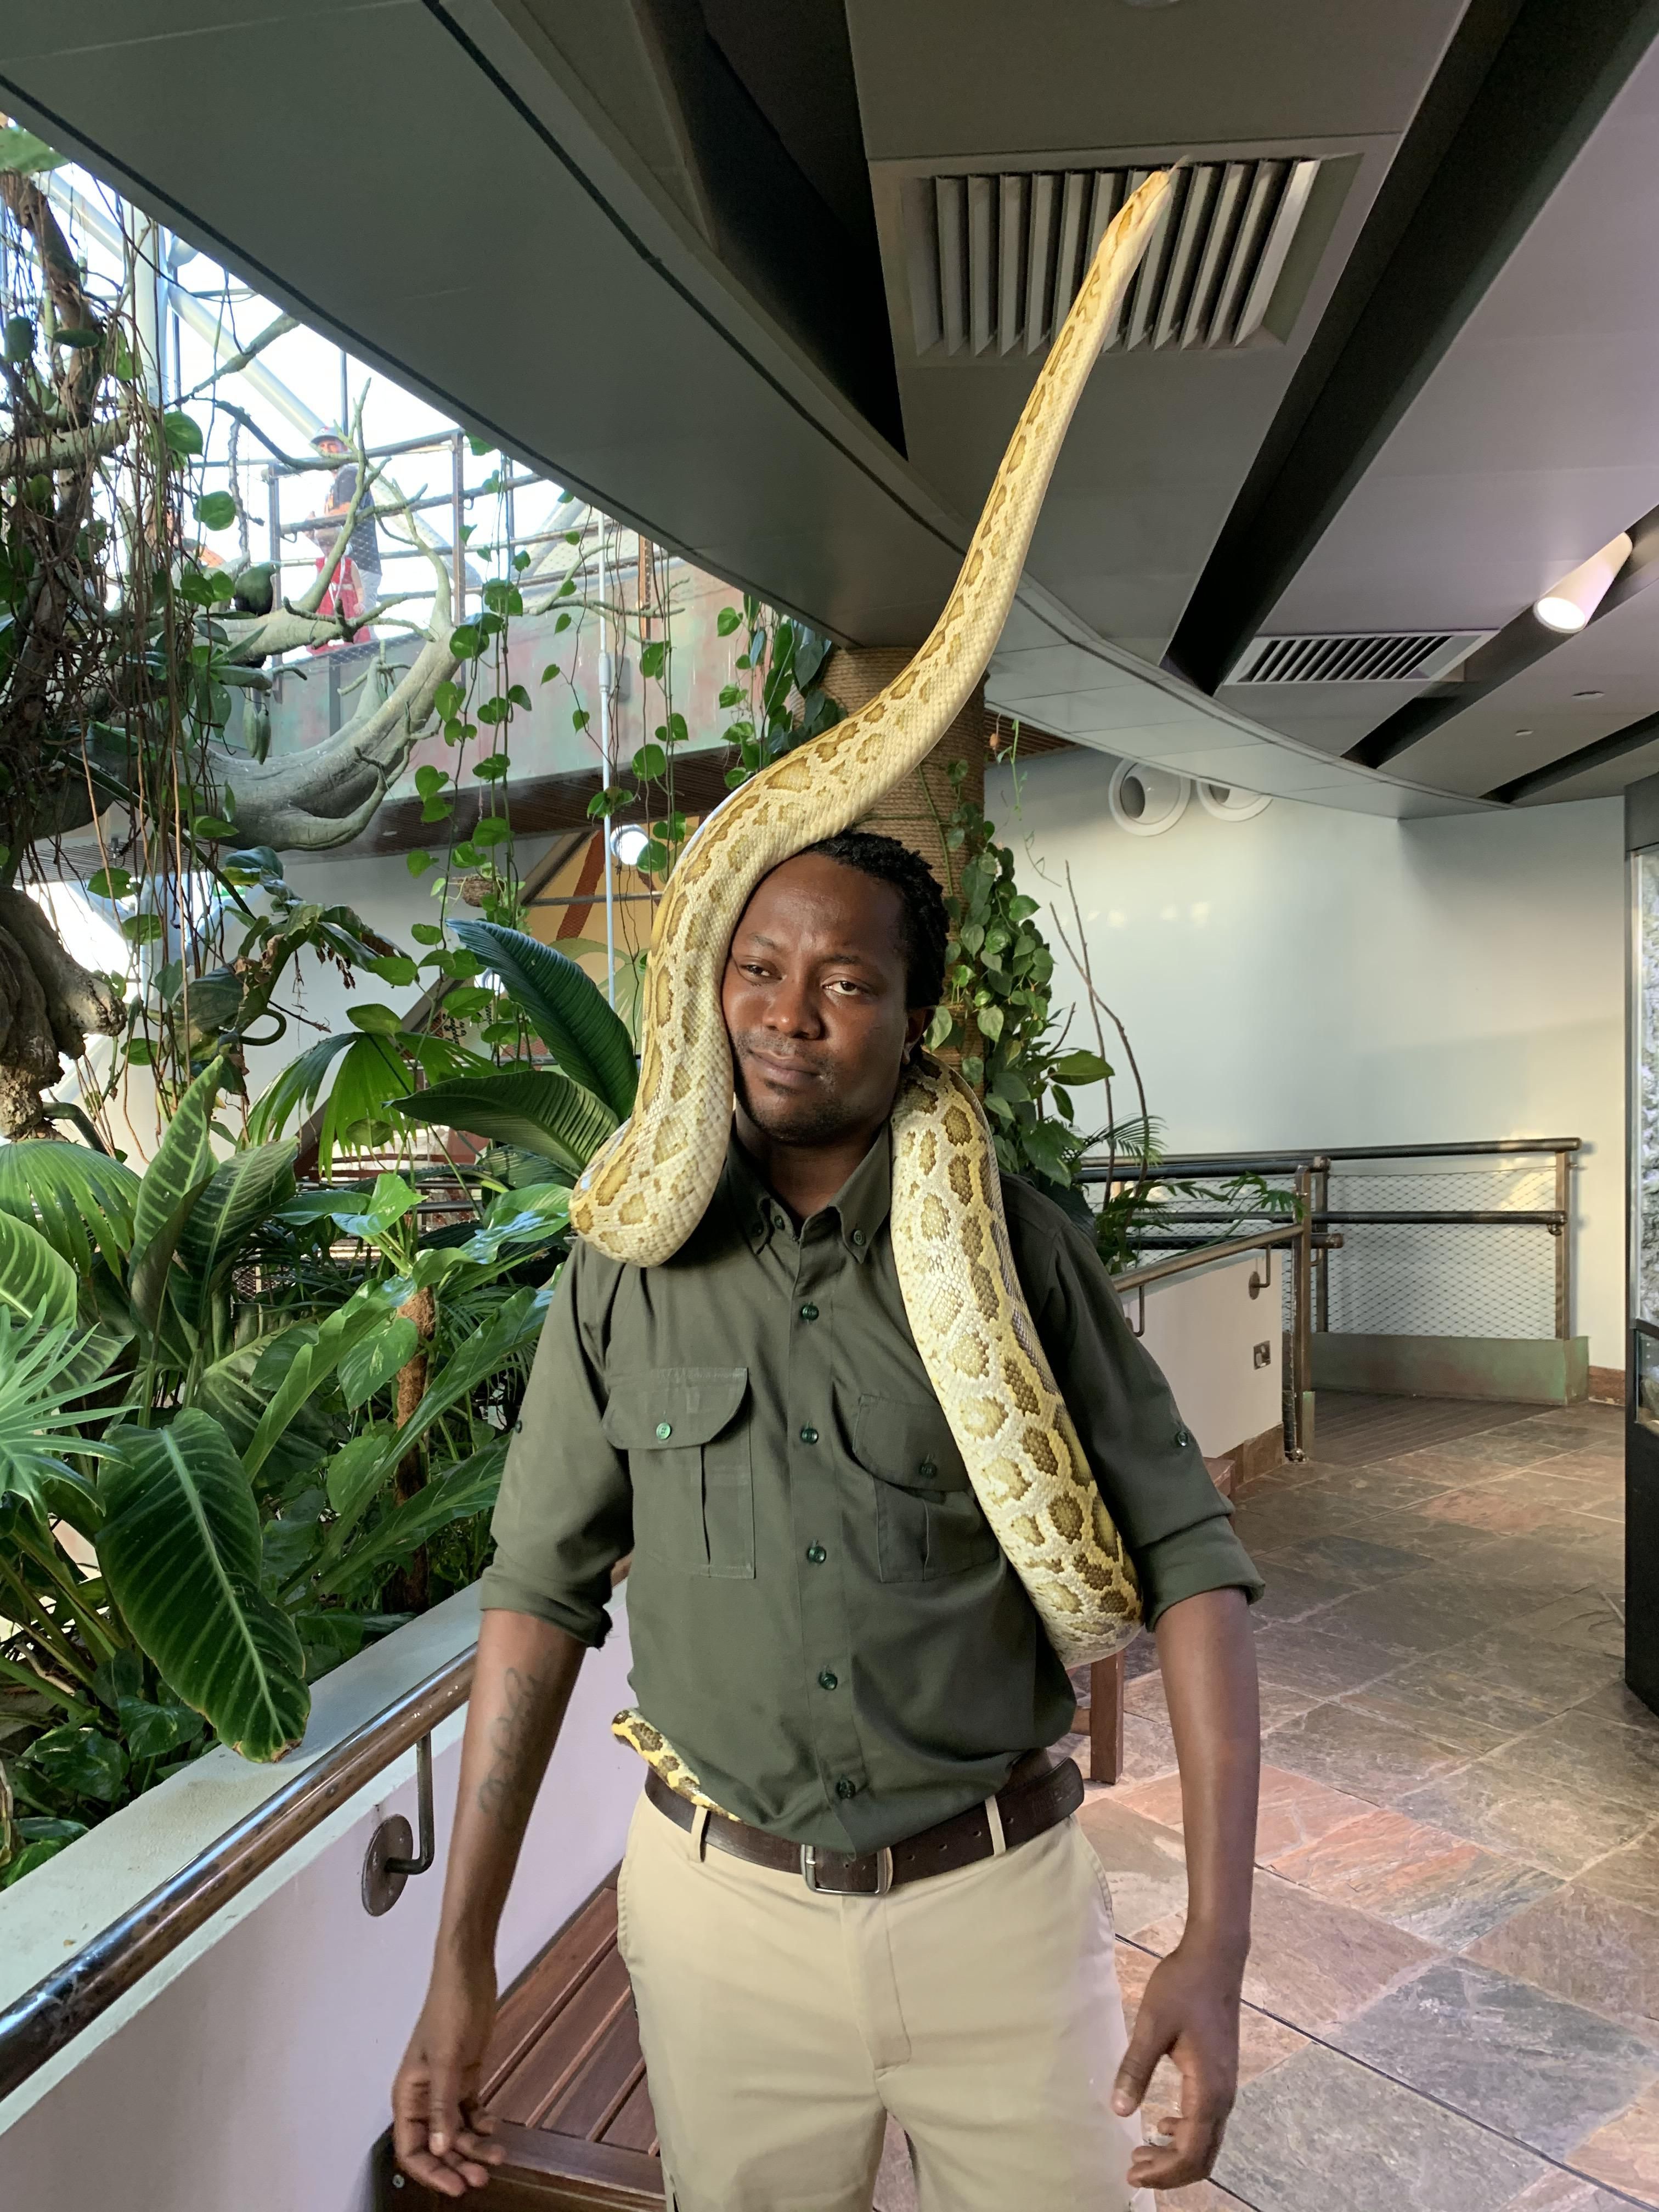 This is the snake handler at The Green Planet in Dubai. He says he loves his job.